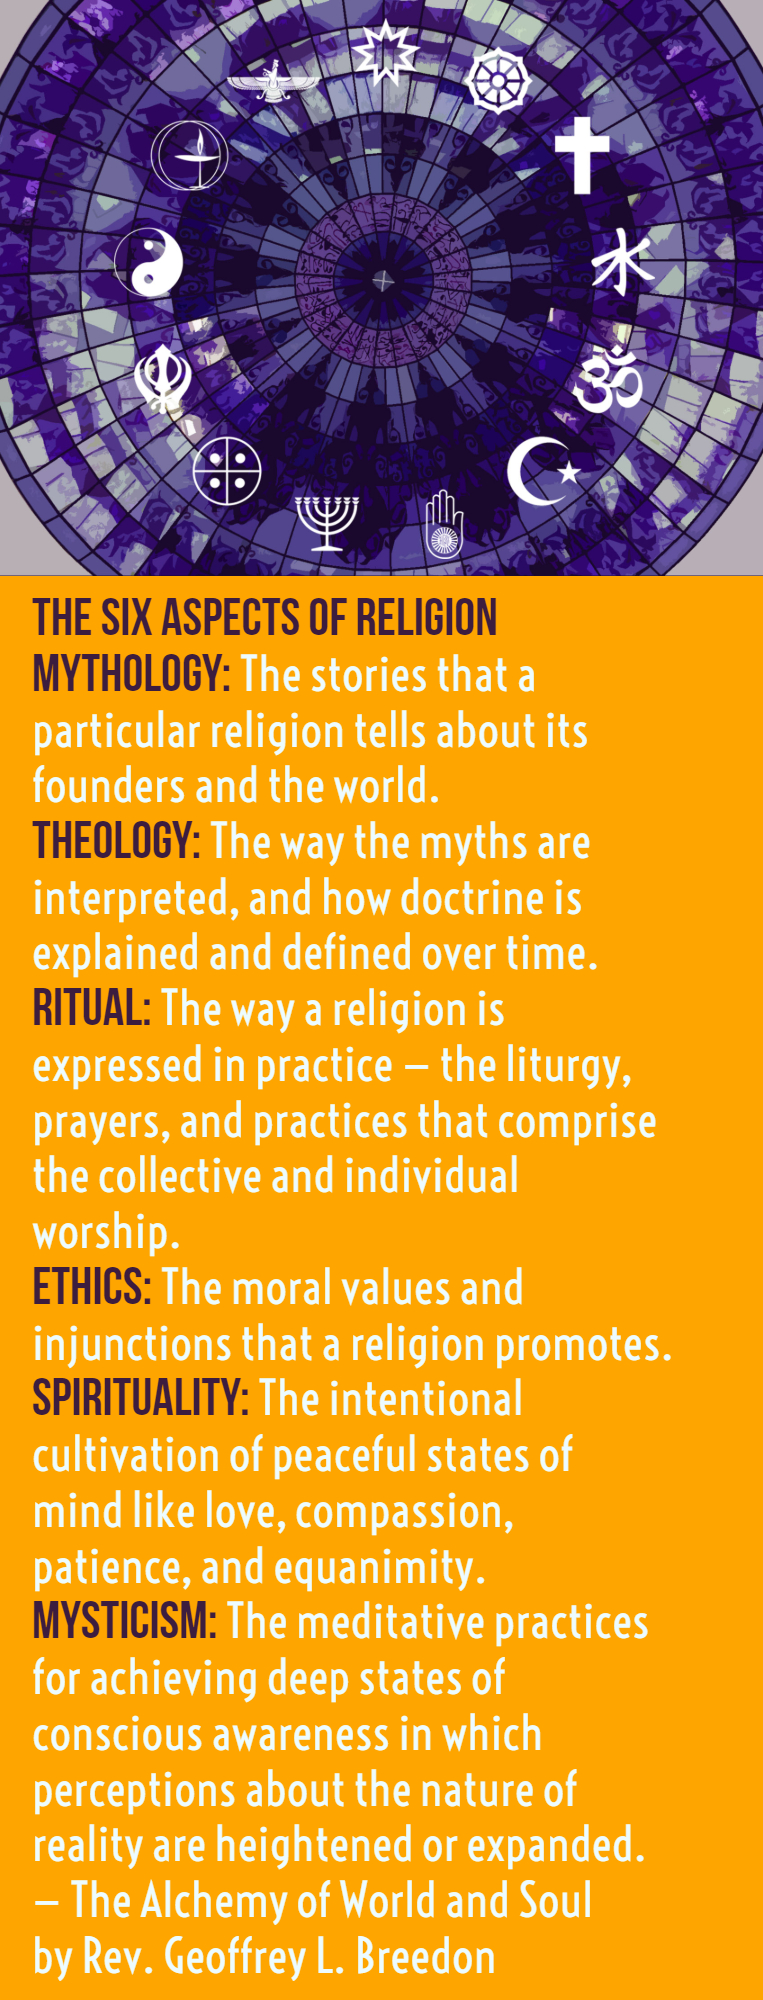 The Six Aspects of Religion